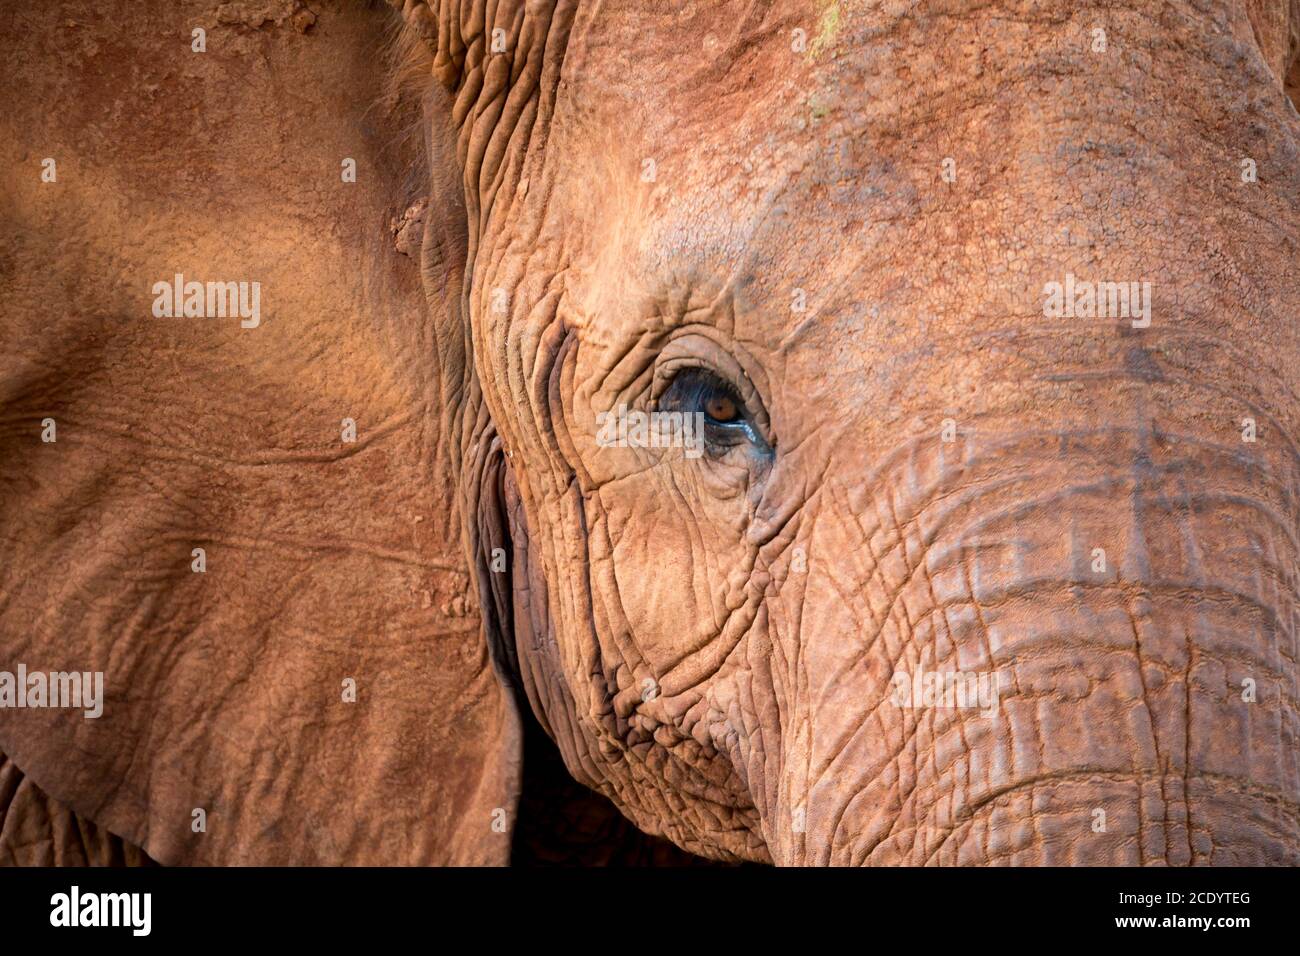 The face of a big red elephant Stock Photo